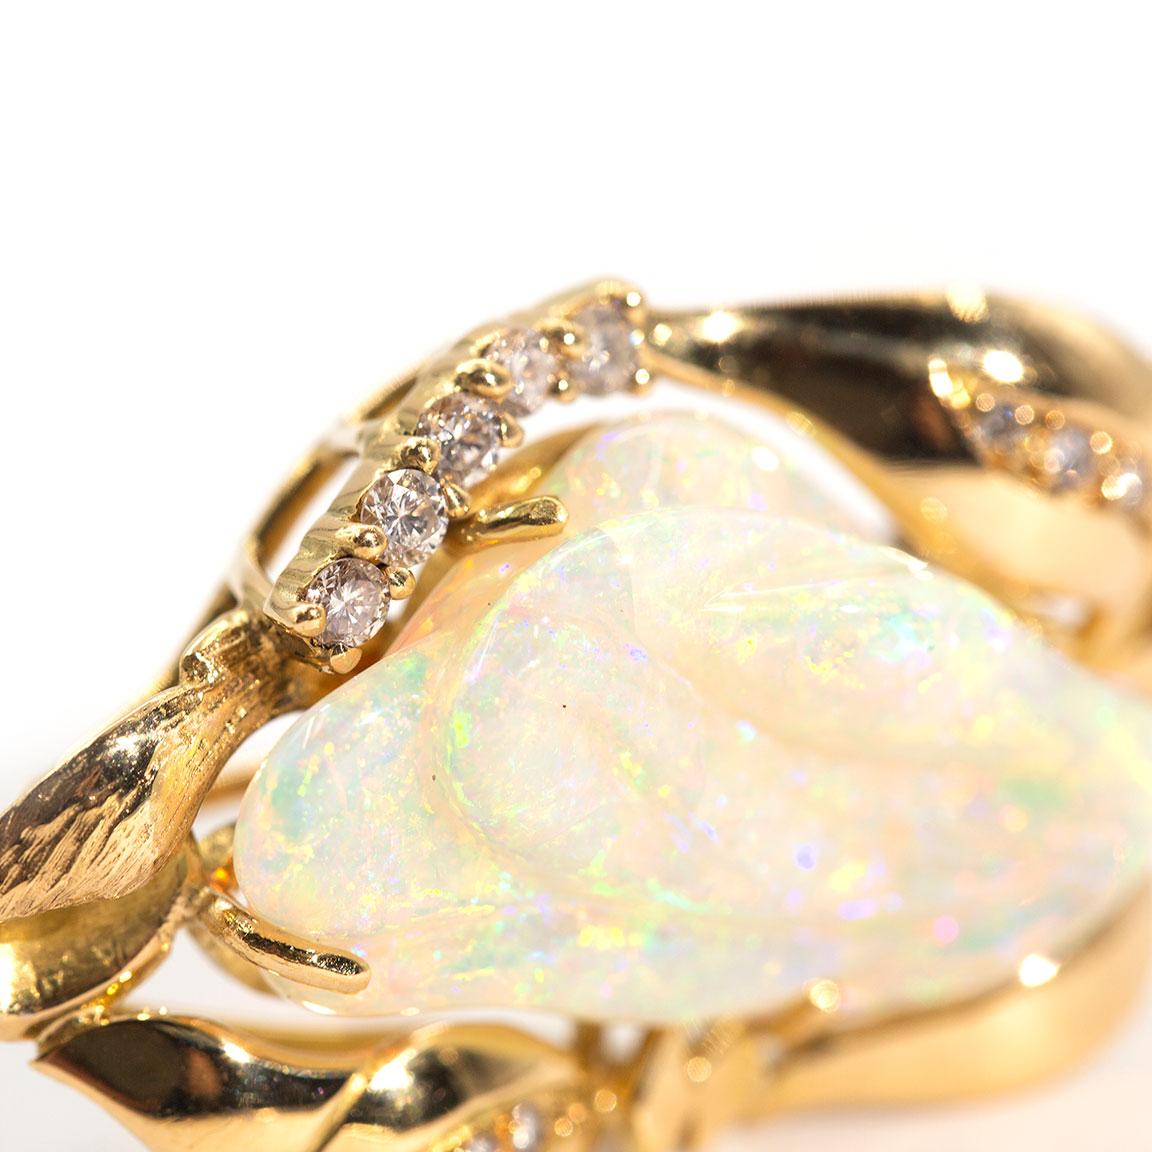 9.6 Carat Solid Australian Carved Opal and Diamond 18 Carat Gold Pendant Brooch For Sale 4